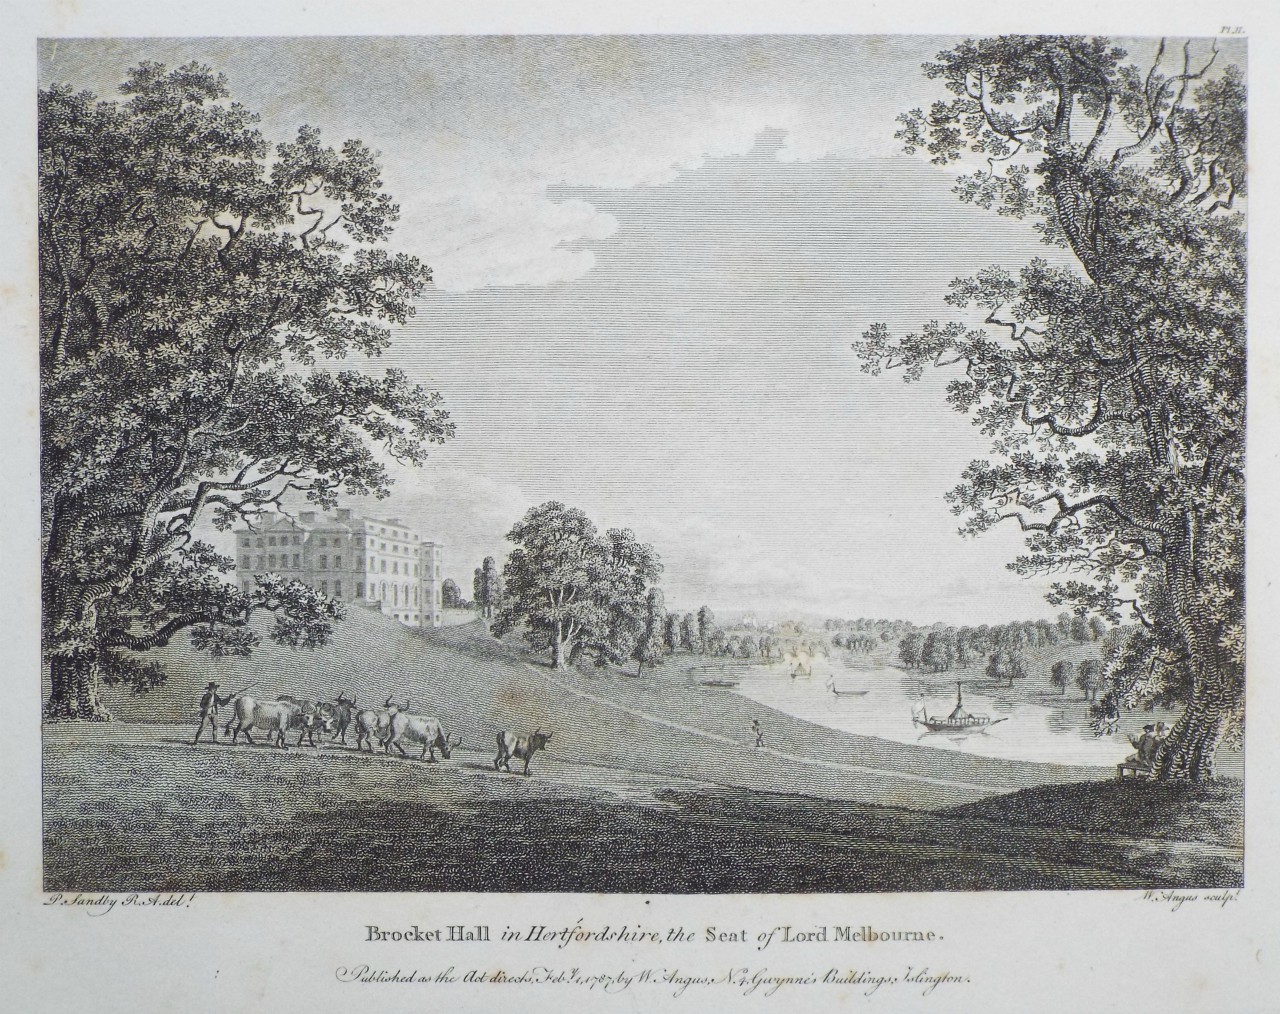 Print - Brocket Hall i Hertfordshire, the Seat of Lord Melbourne. - Angus